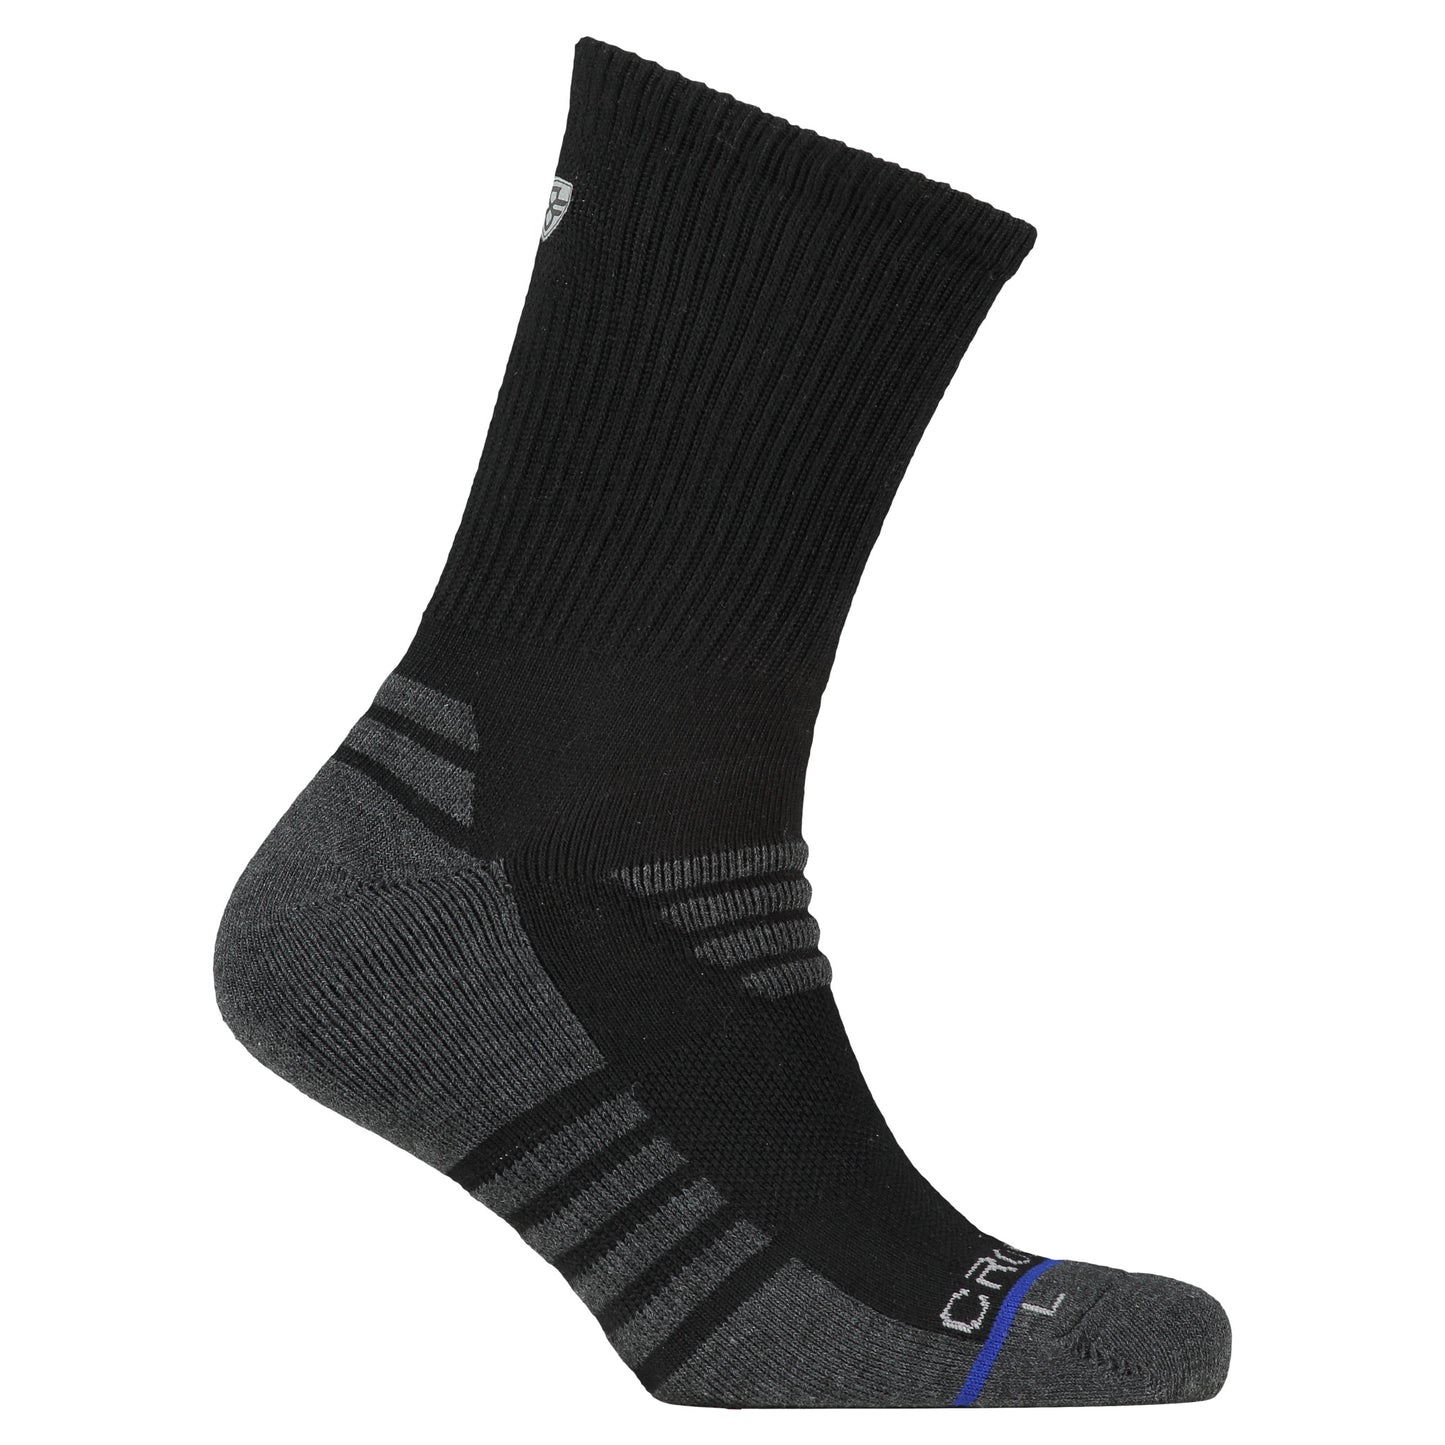 Crossfly men's Tempo Crew Socks in black / charcoal from the Performance series, featuring AirBeams and 180 Hold.